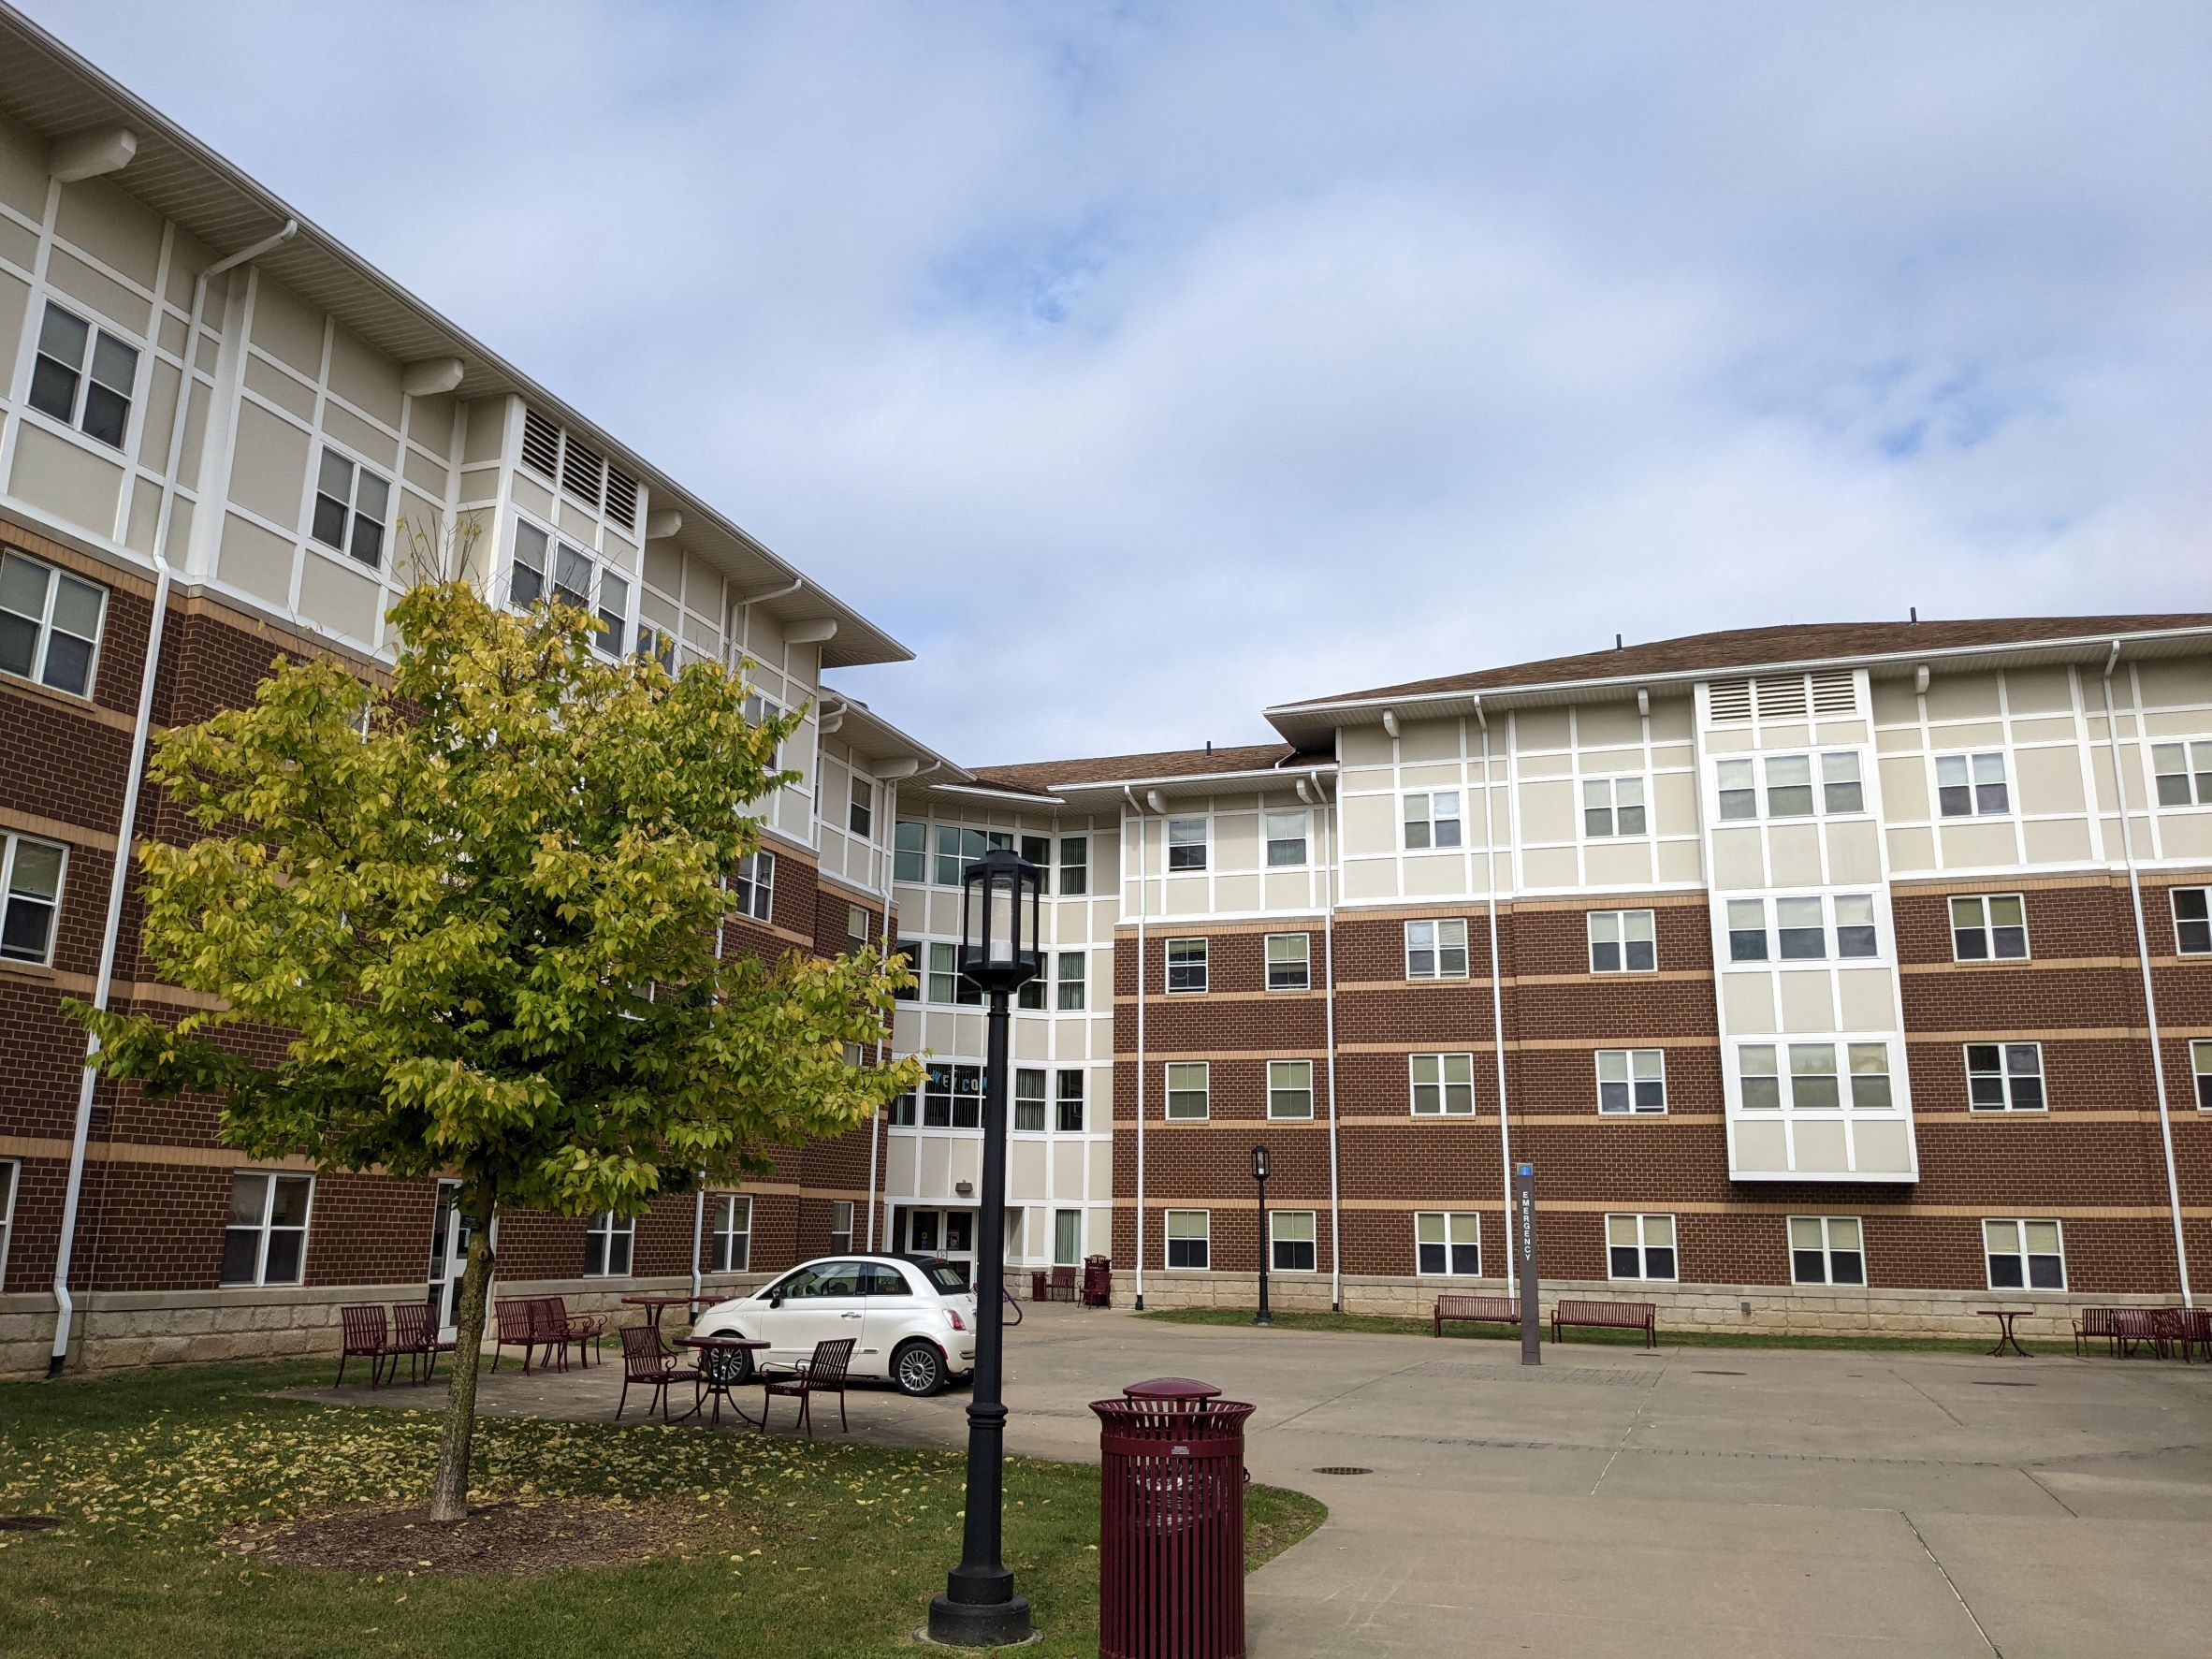 Modern stylized arts & crafts residence hall with brown brick, beige tudor looking siding with white accents and big roof overhangs